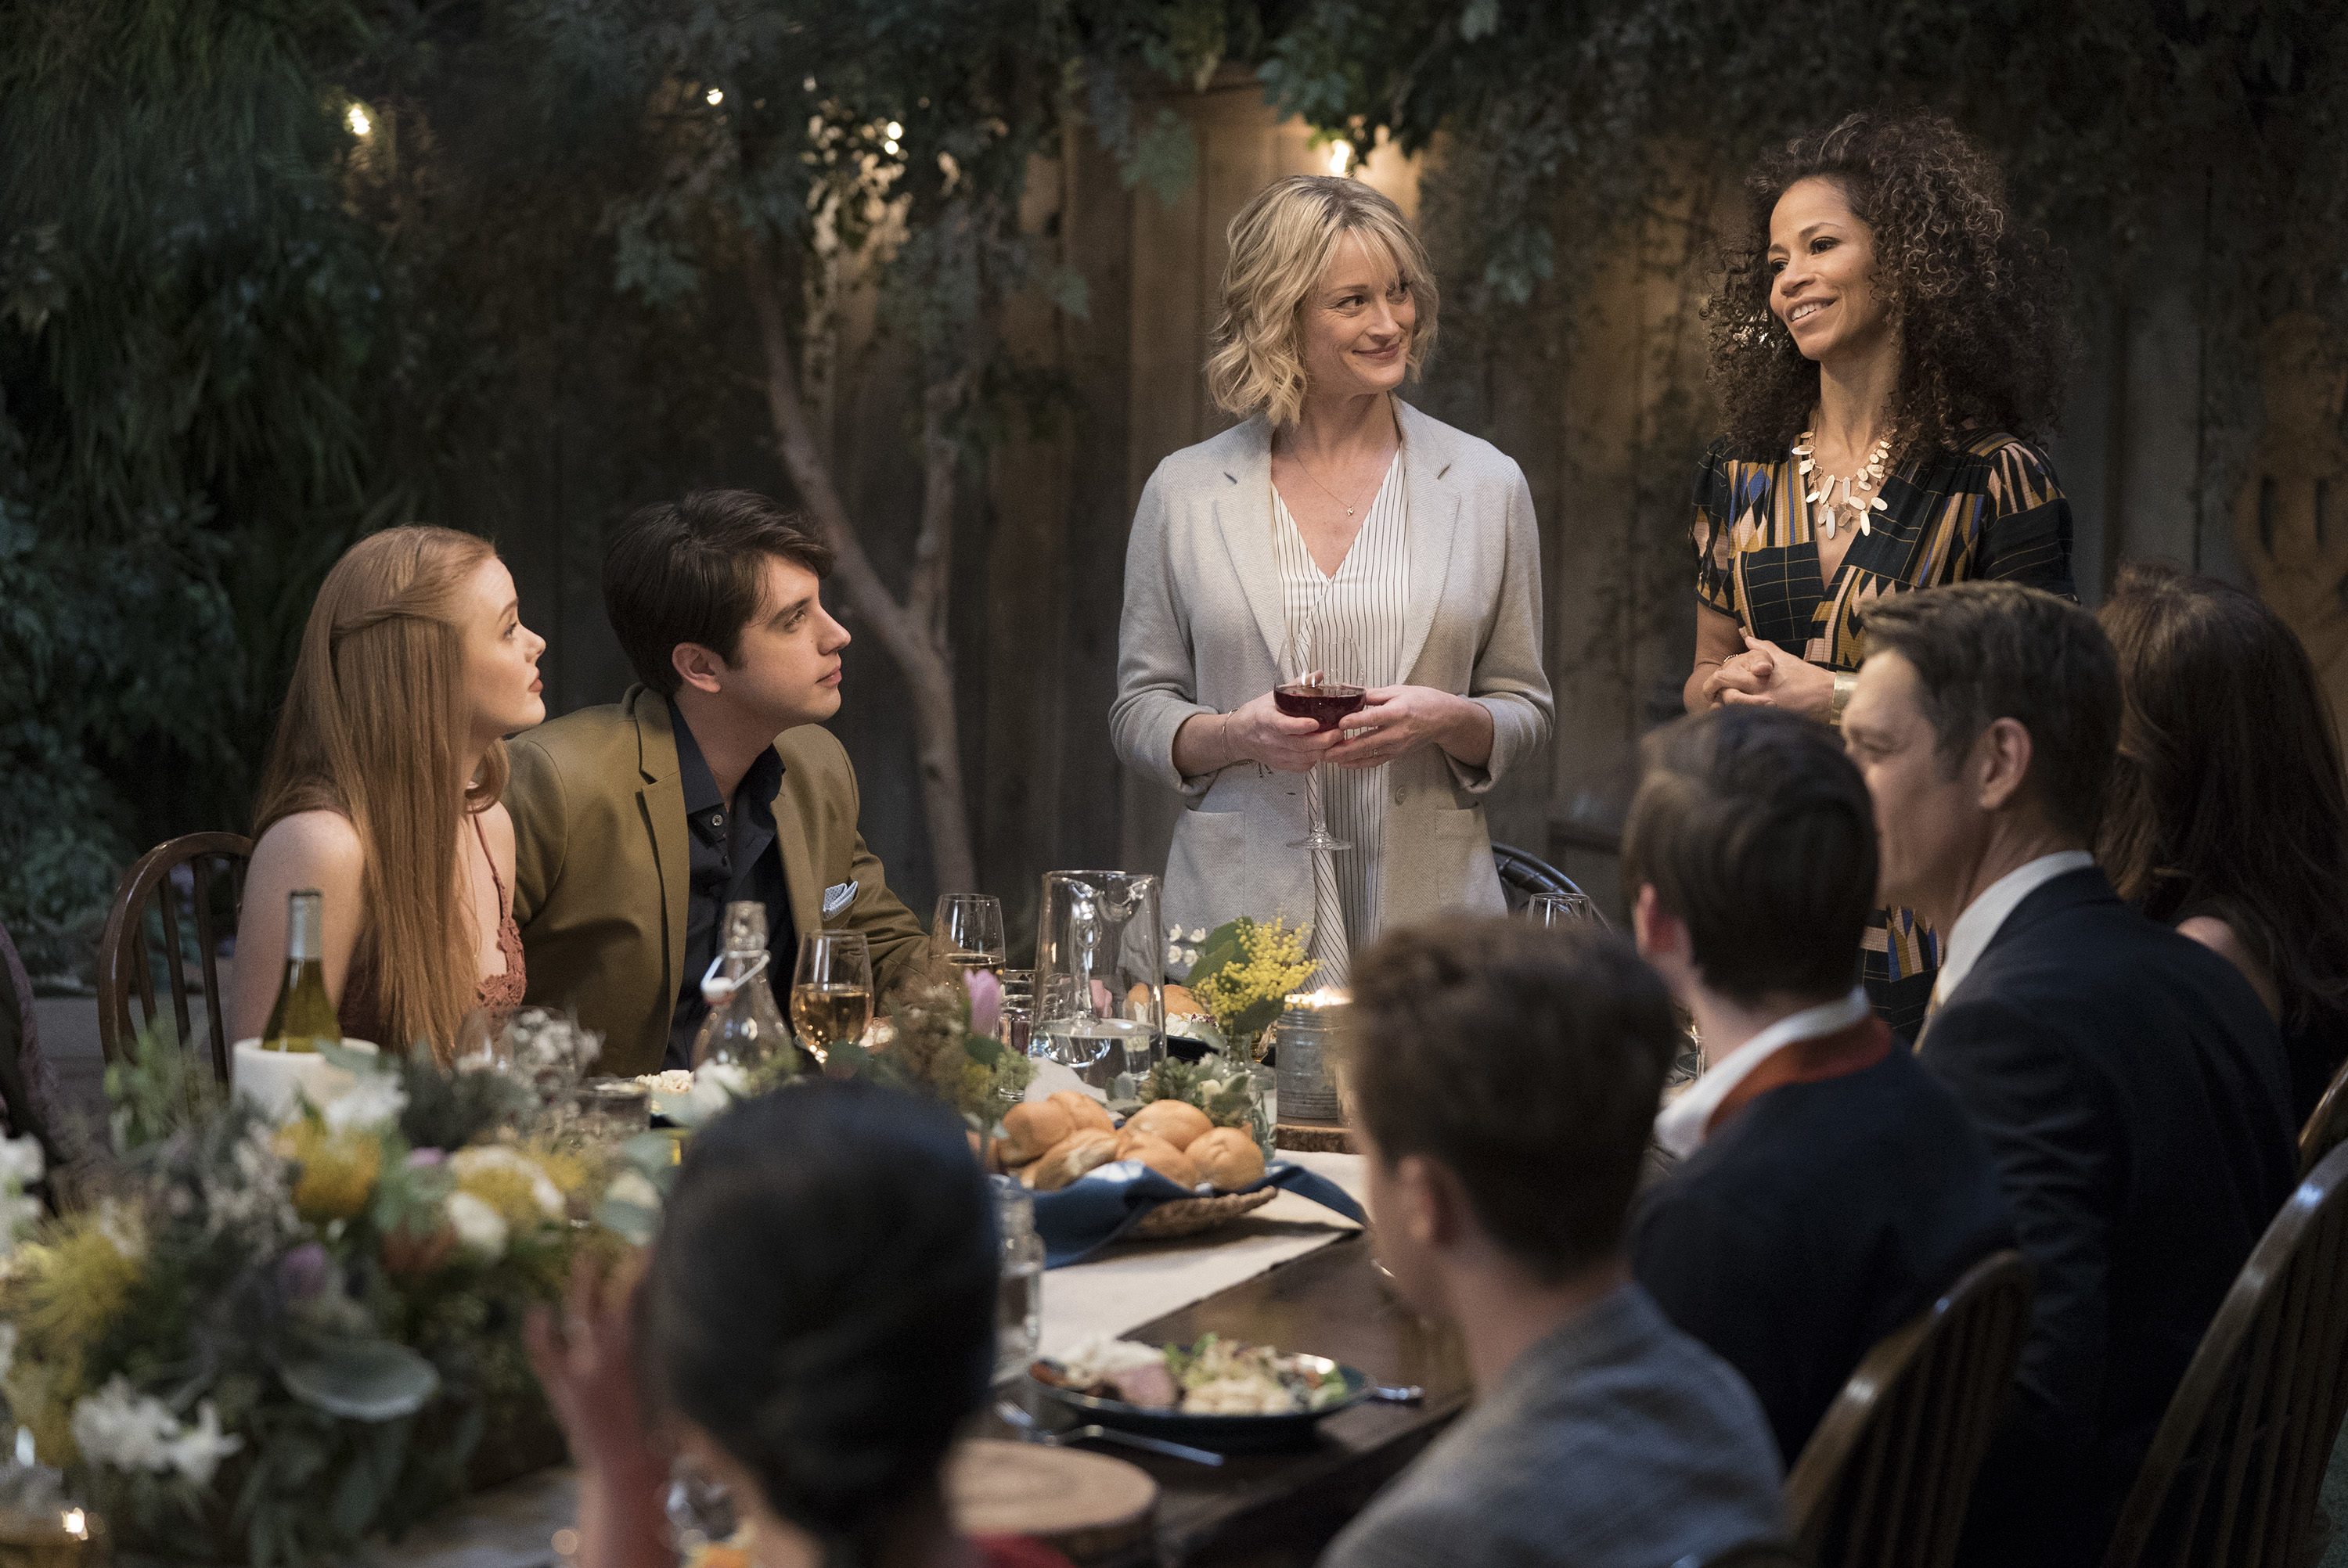 The Fosters 2018 Finale Episodes Times & Schedule for Series End